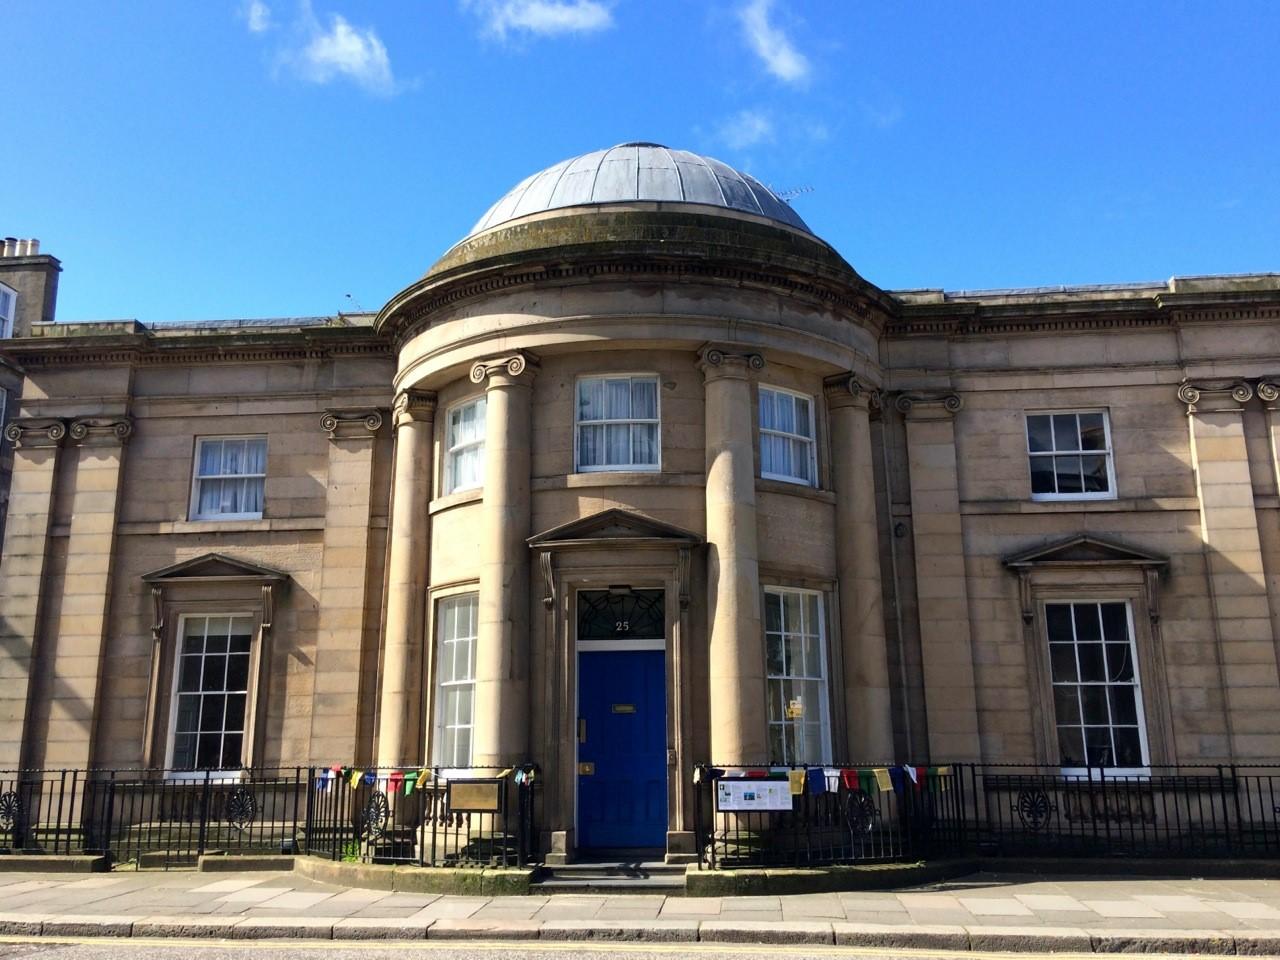 This Georgian building was originally opened in 1805 as the first Bank of Leith. It is now open to all faiths for prayer, meditation and other activites to benefit the body and spirit. Half-hour doors will run at 2.30pm and 3.30pm before a talk in the shrine room.

25 Bernard Street, EH6 6SH, open Sunday 2pm-5pm.